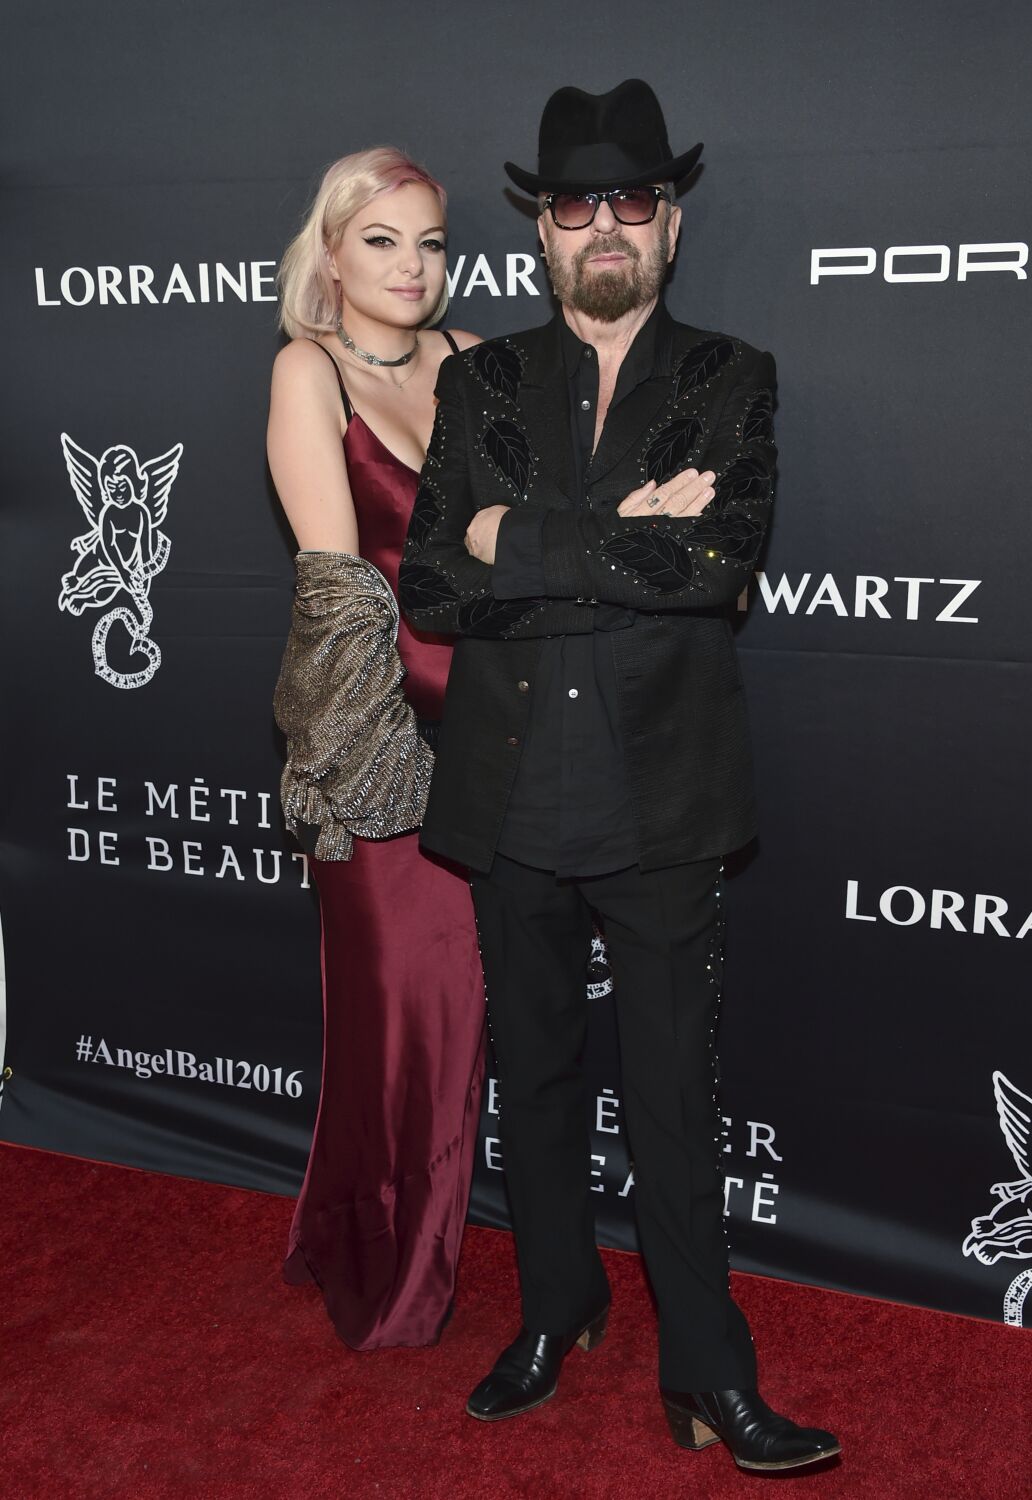 Dave Stewart's daughter auditioned for 'American Idol,' and he was right by her side